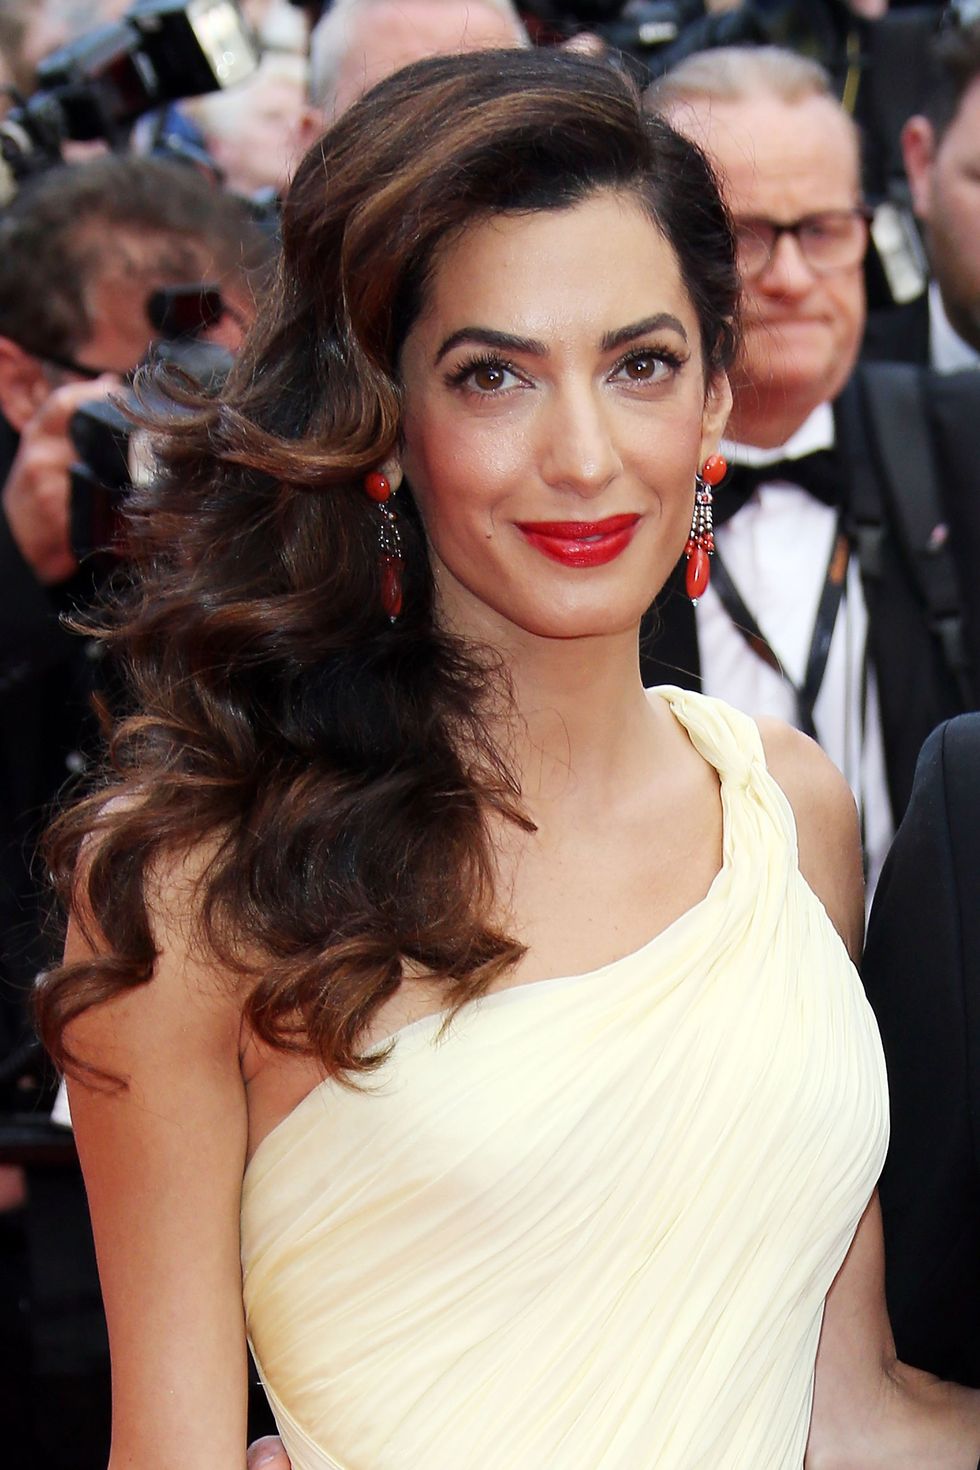 <p>The lawyer and activist's ruby lips stood out at the Cannes premiere of her husband's film <em data-redactor-tag="em" data-verified="redactor">Money Monster.</em></p>